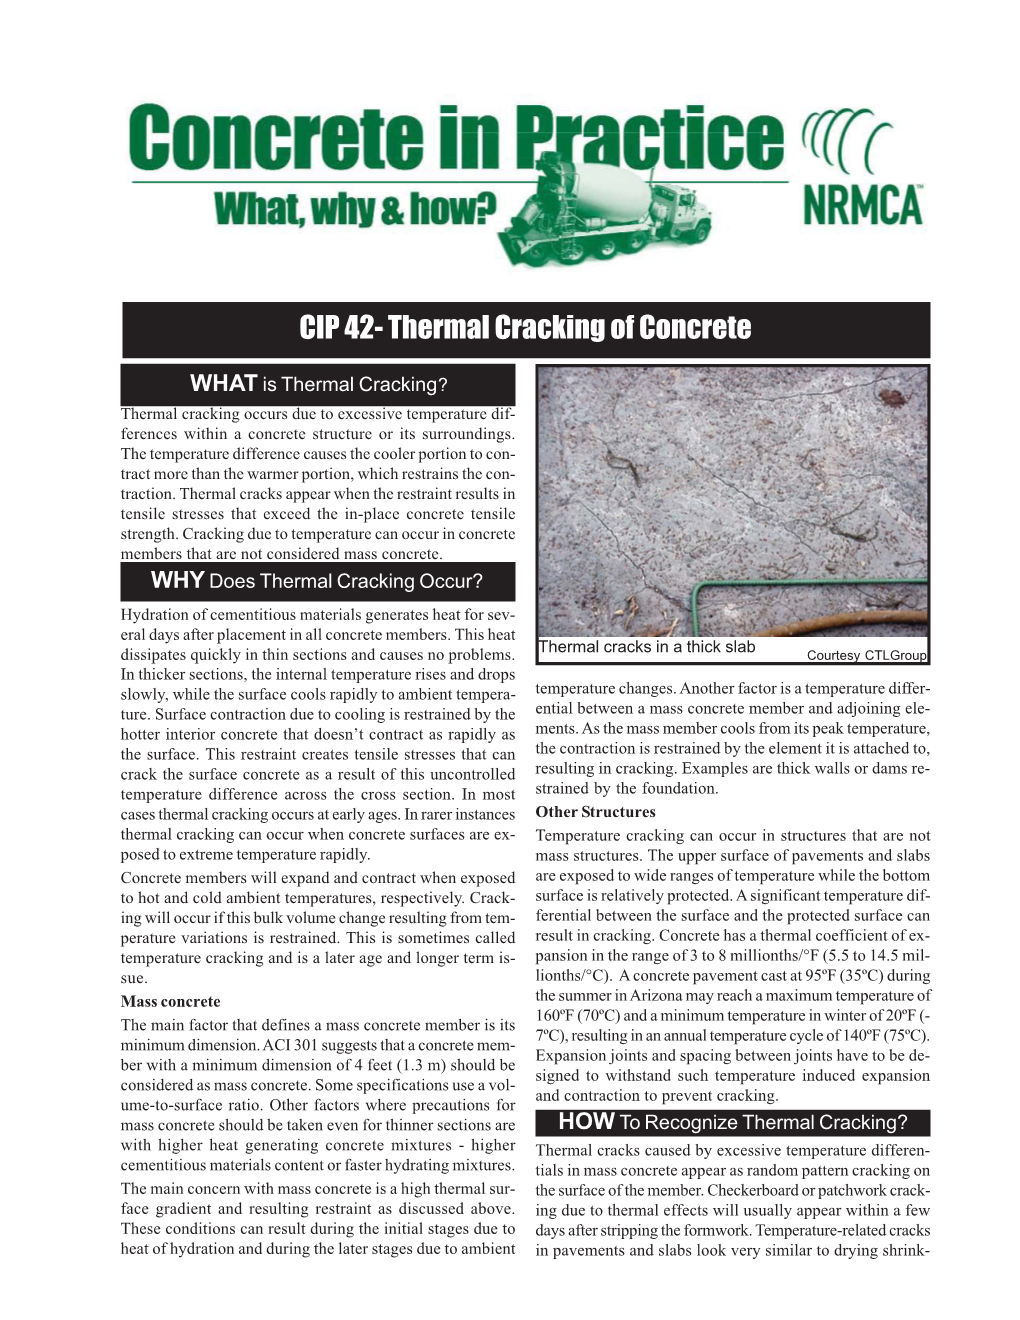 Thermal Cracking of Concrete